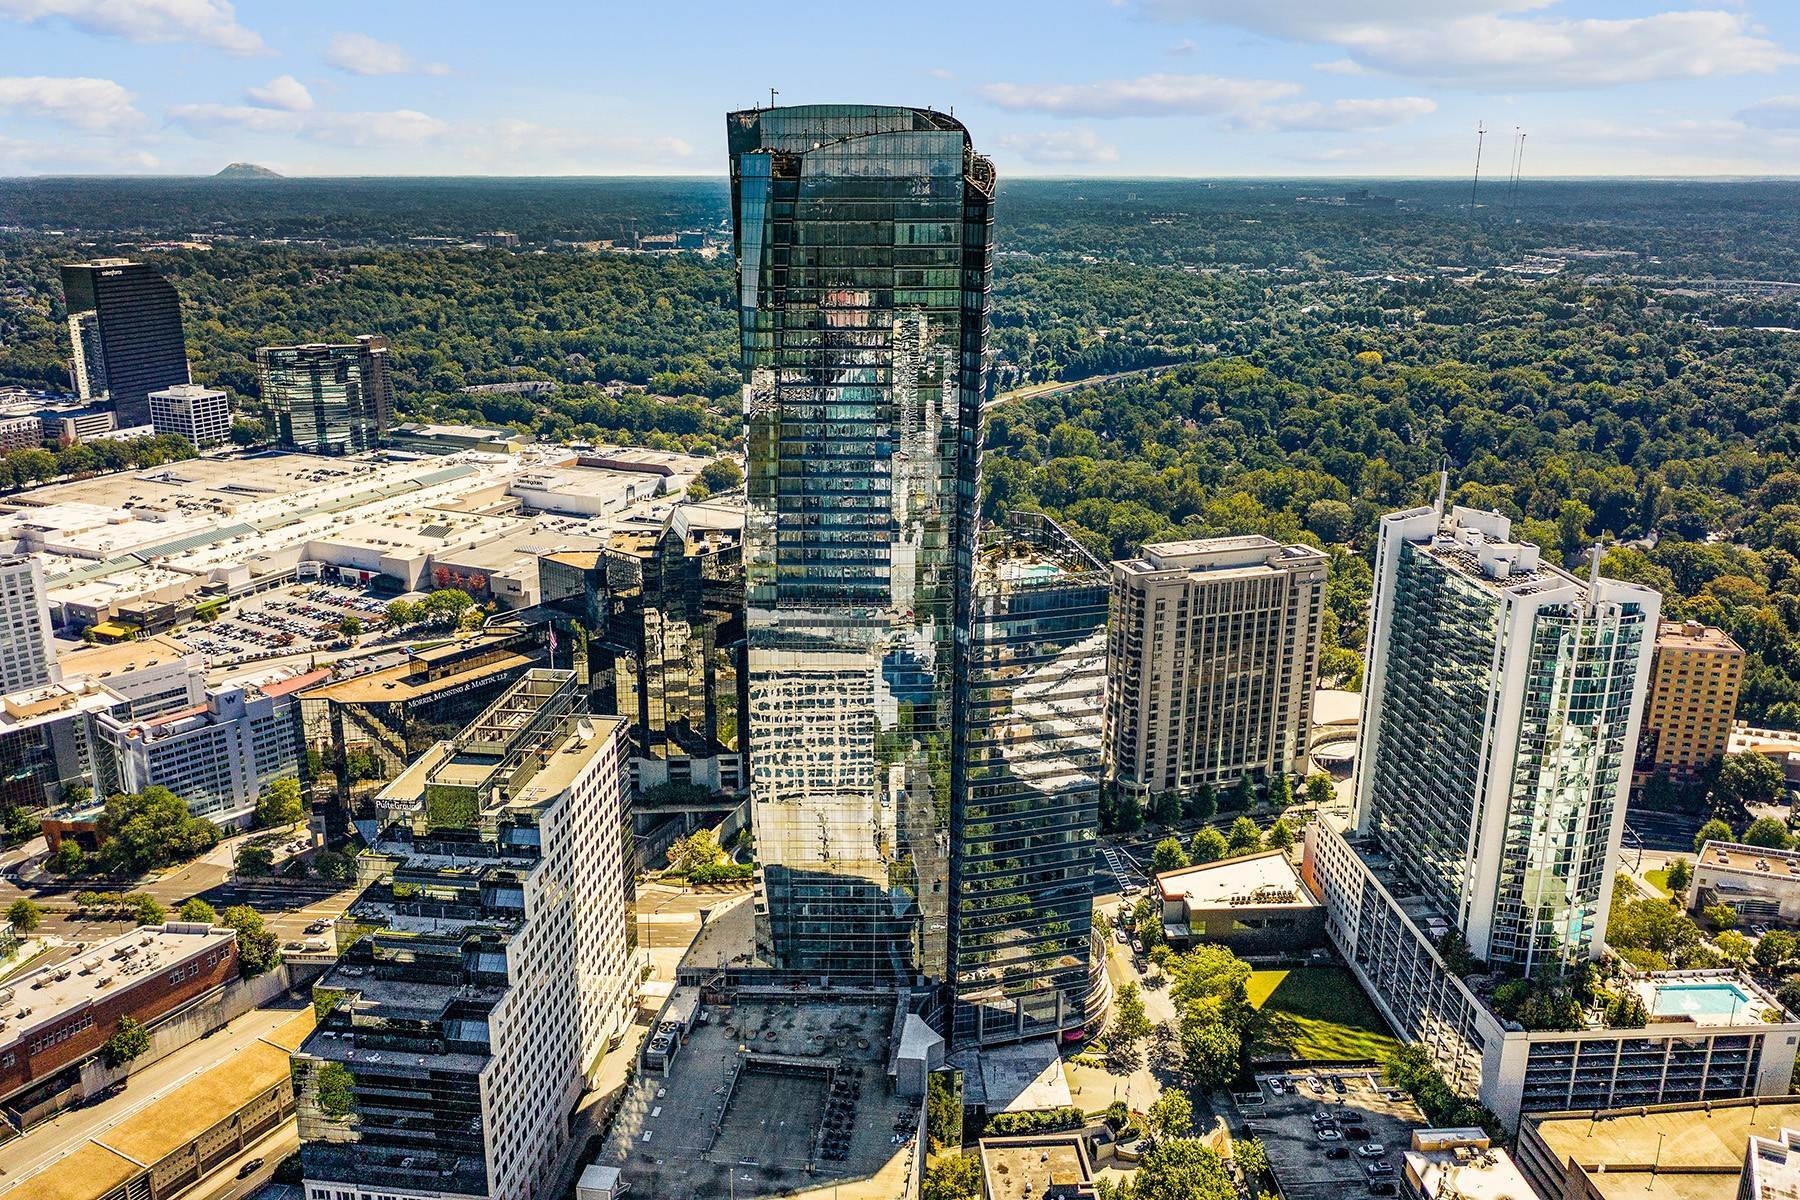 30. Condominiums at Luxurious Turnkey Living in the Heart of Buckhead with Panoramic Views 3344 Peachtree Road NE, No. 3405 Atlanta, Georgia 30326 United States